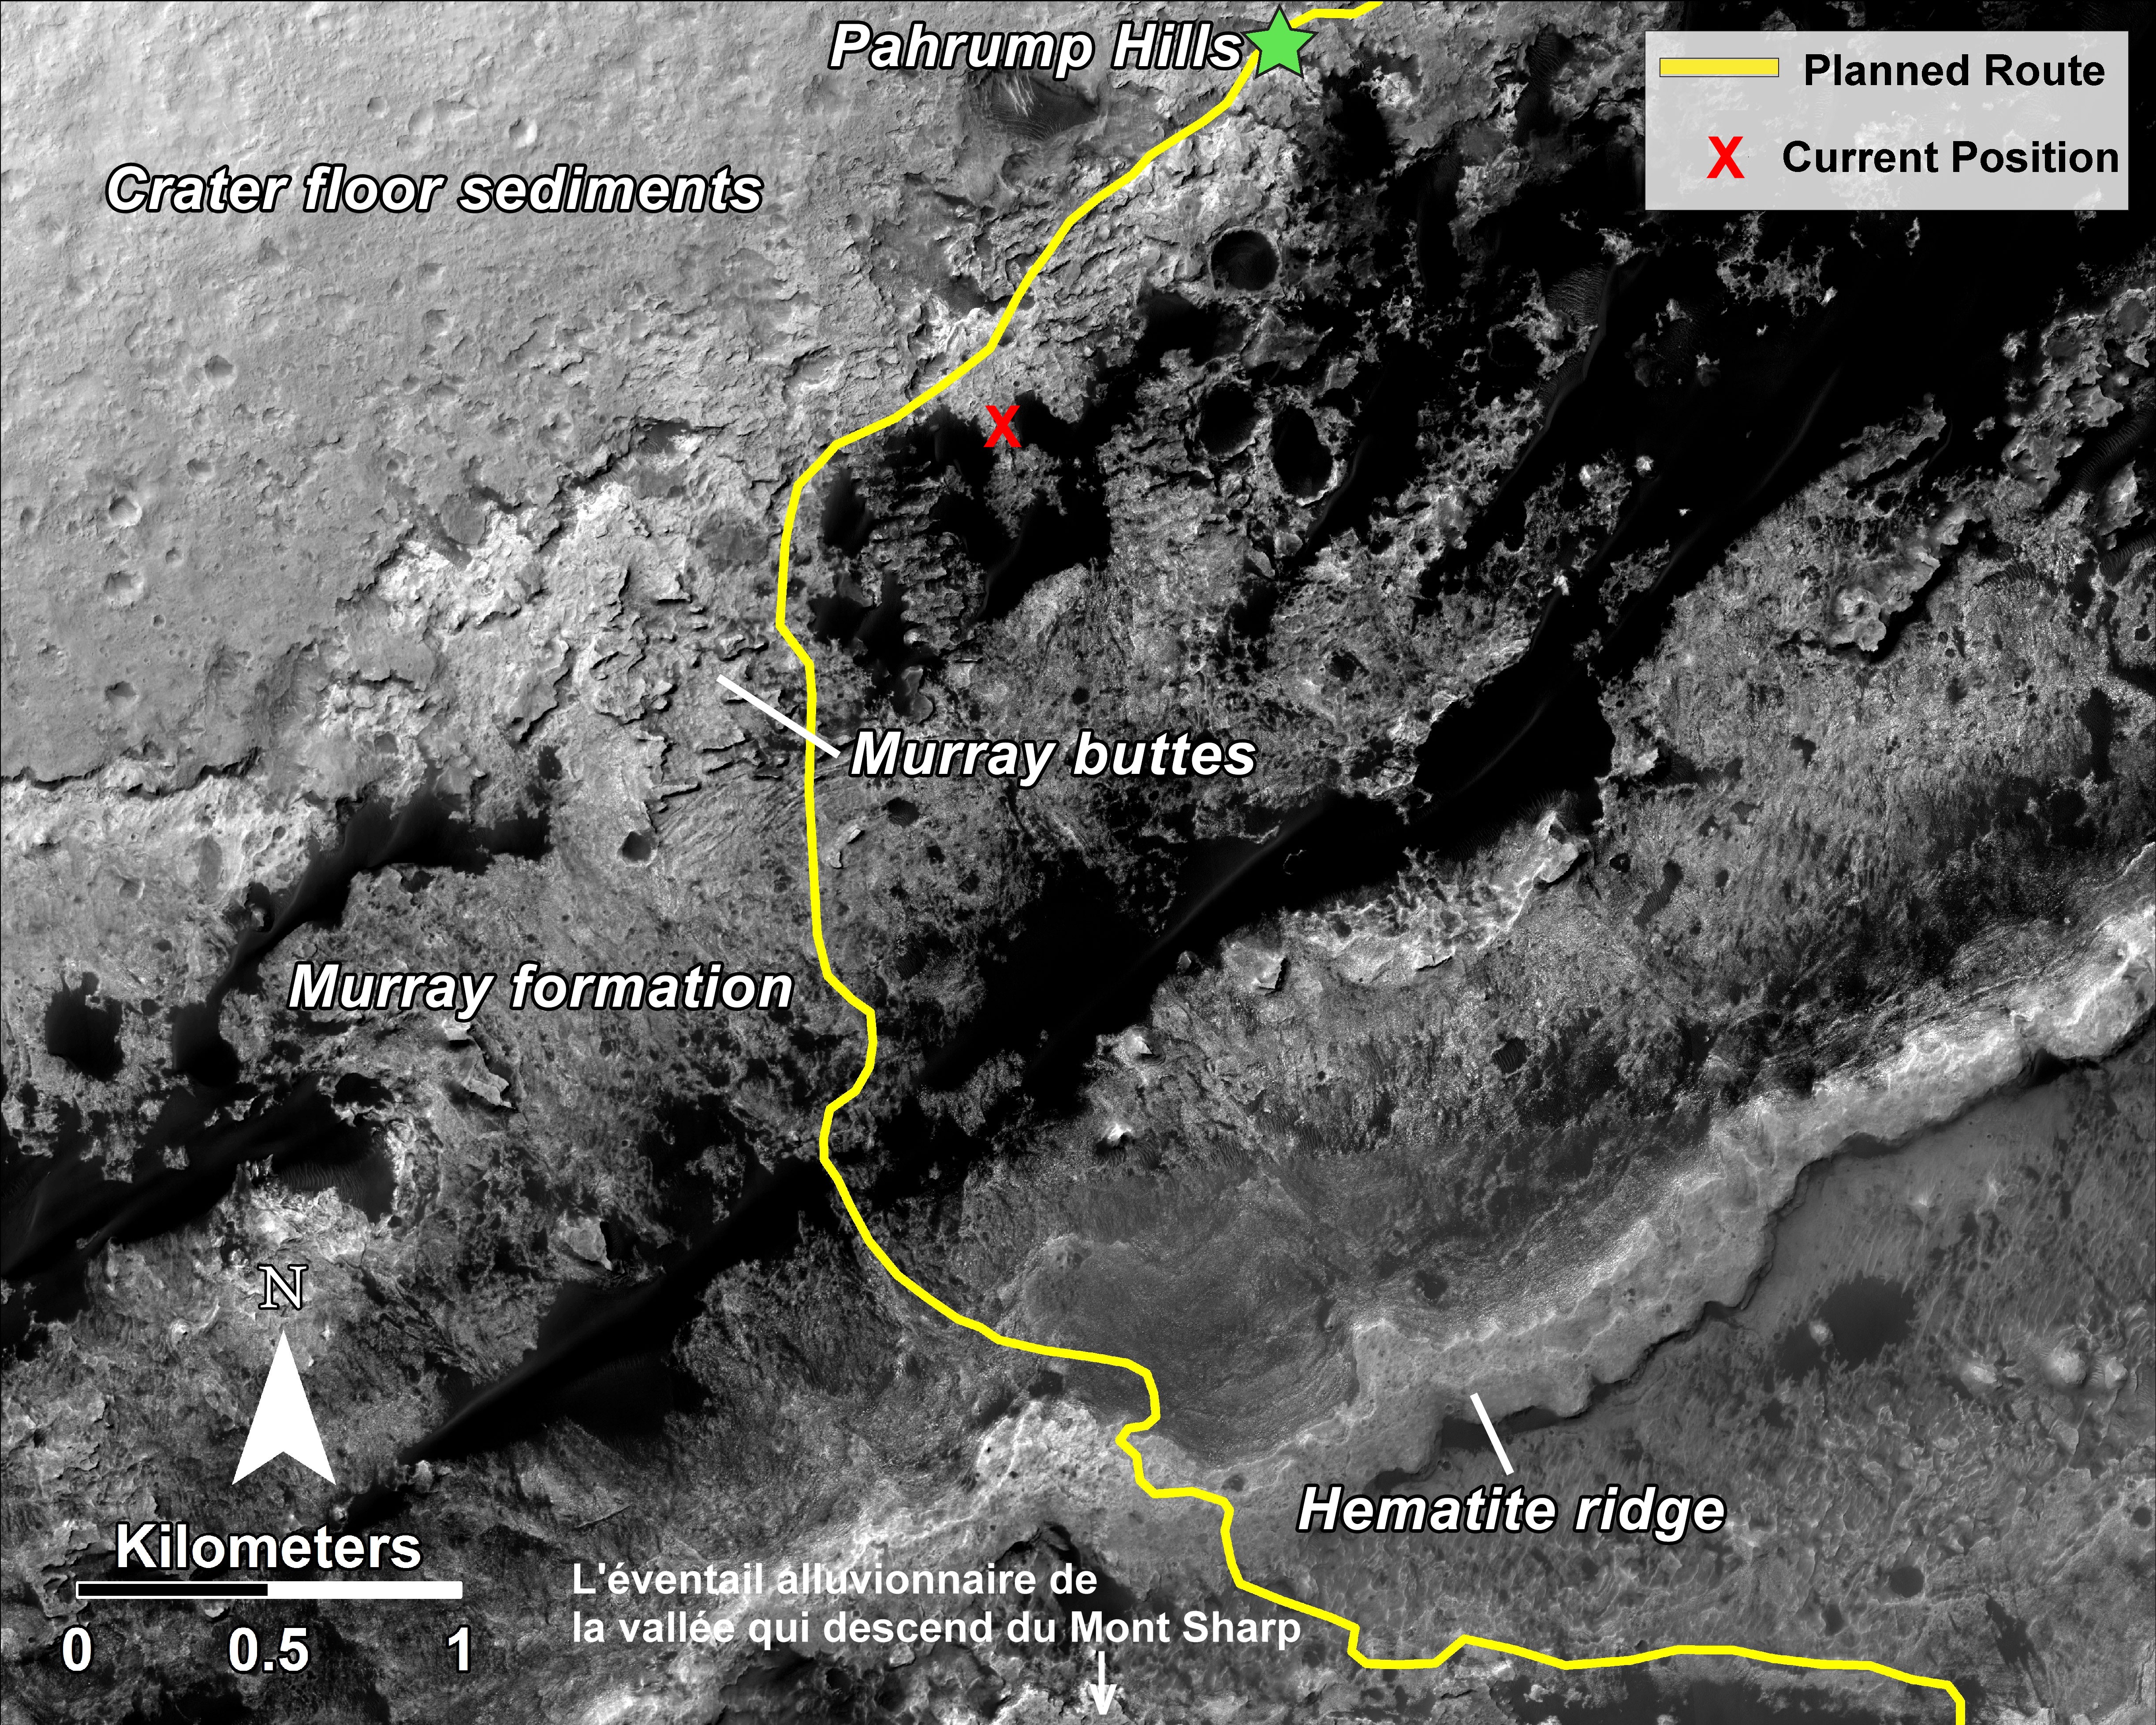 nasa-msl-mro-curiosity-rover-hirise-planned-route-map-pahrump-hills-to-mount-sharp-pia18780-full-renseigné (1)